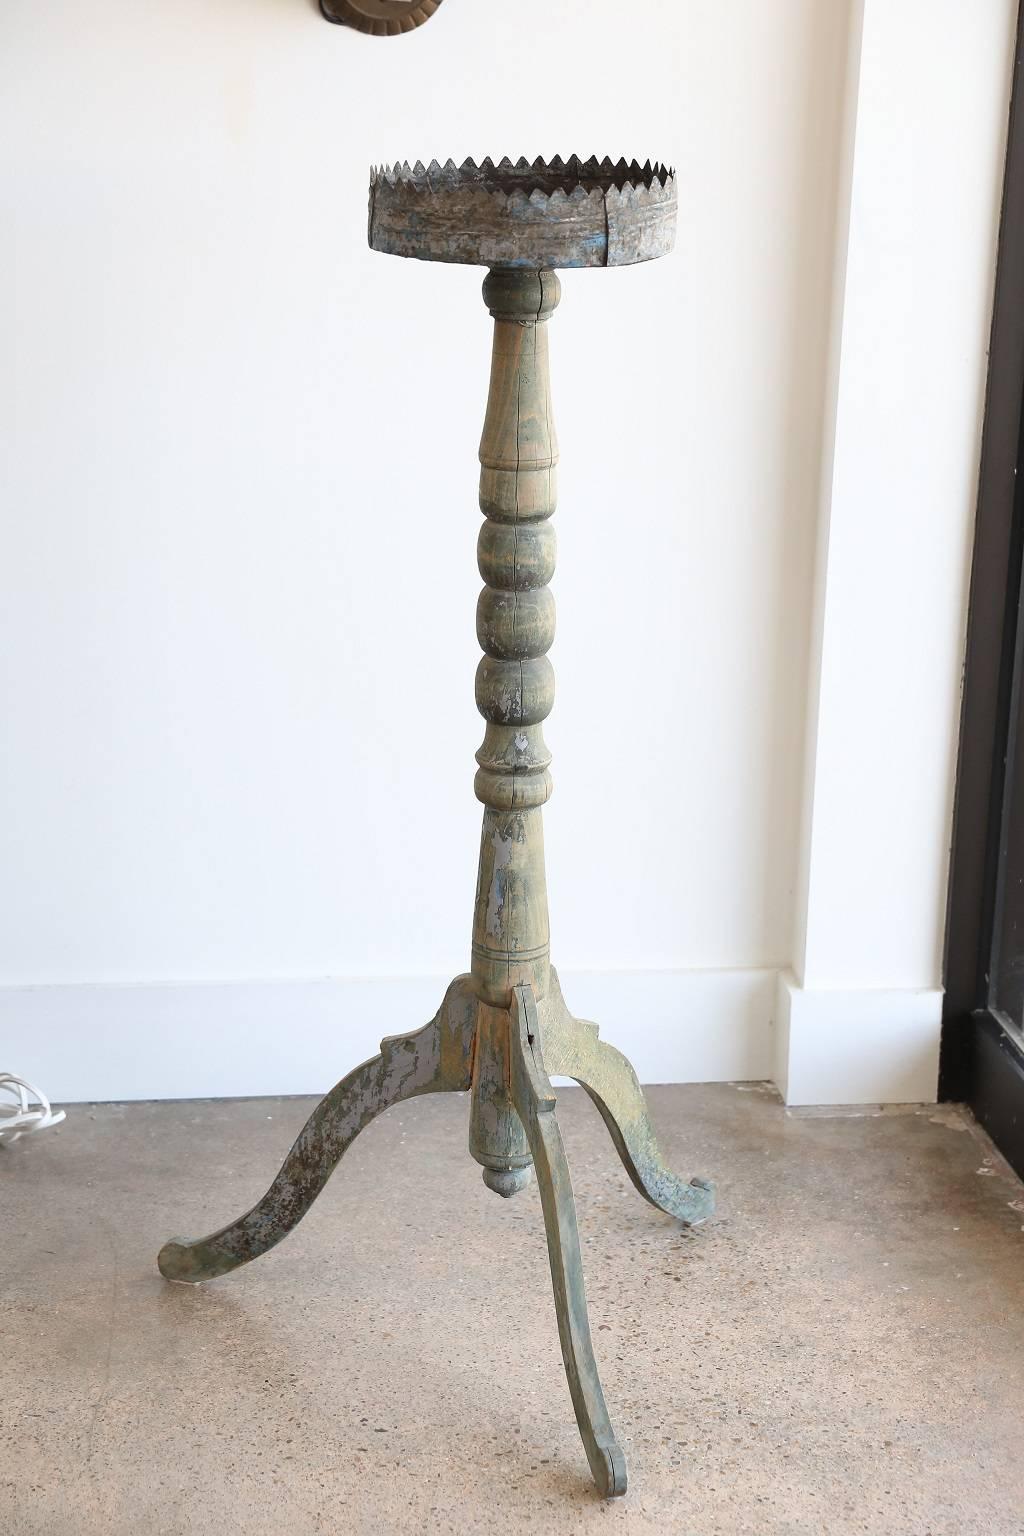 18th century painted turned wood candle stand with decorative tole drip pan and scrolled leg base.